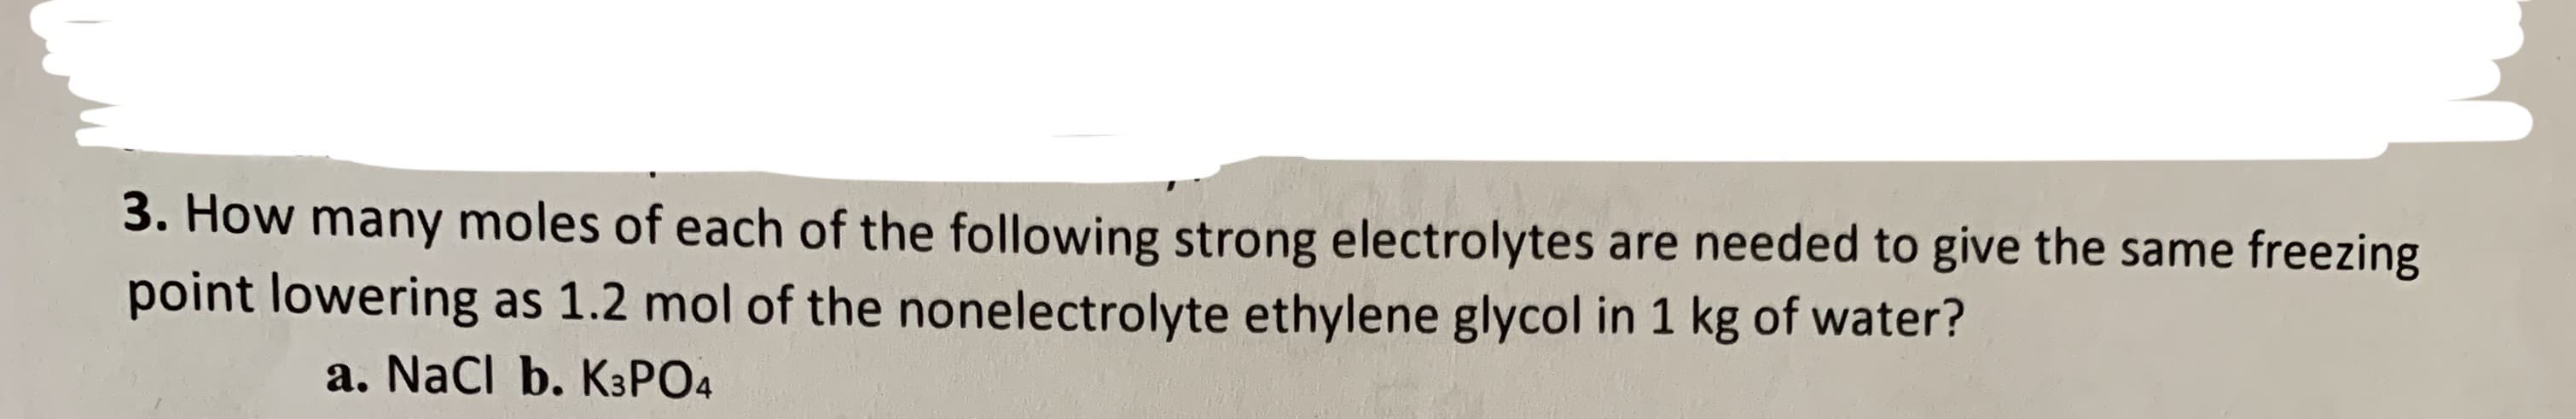 3. How many moles of each of the following strong electrolytes are needed to give the same freezing
point lowering as 1.2 mol of the nonelectrolyte ethylene glycol in 1 kg of water?
a. Nacl b. K3PO4
